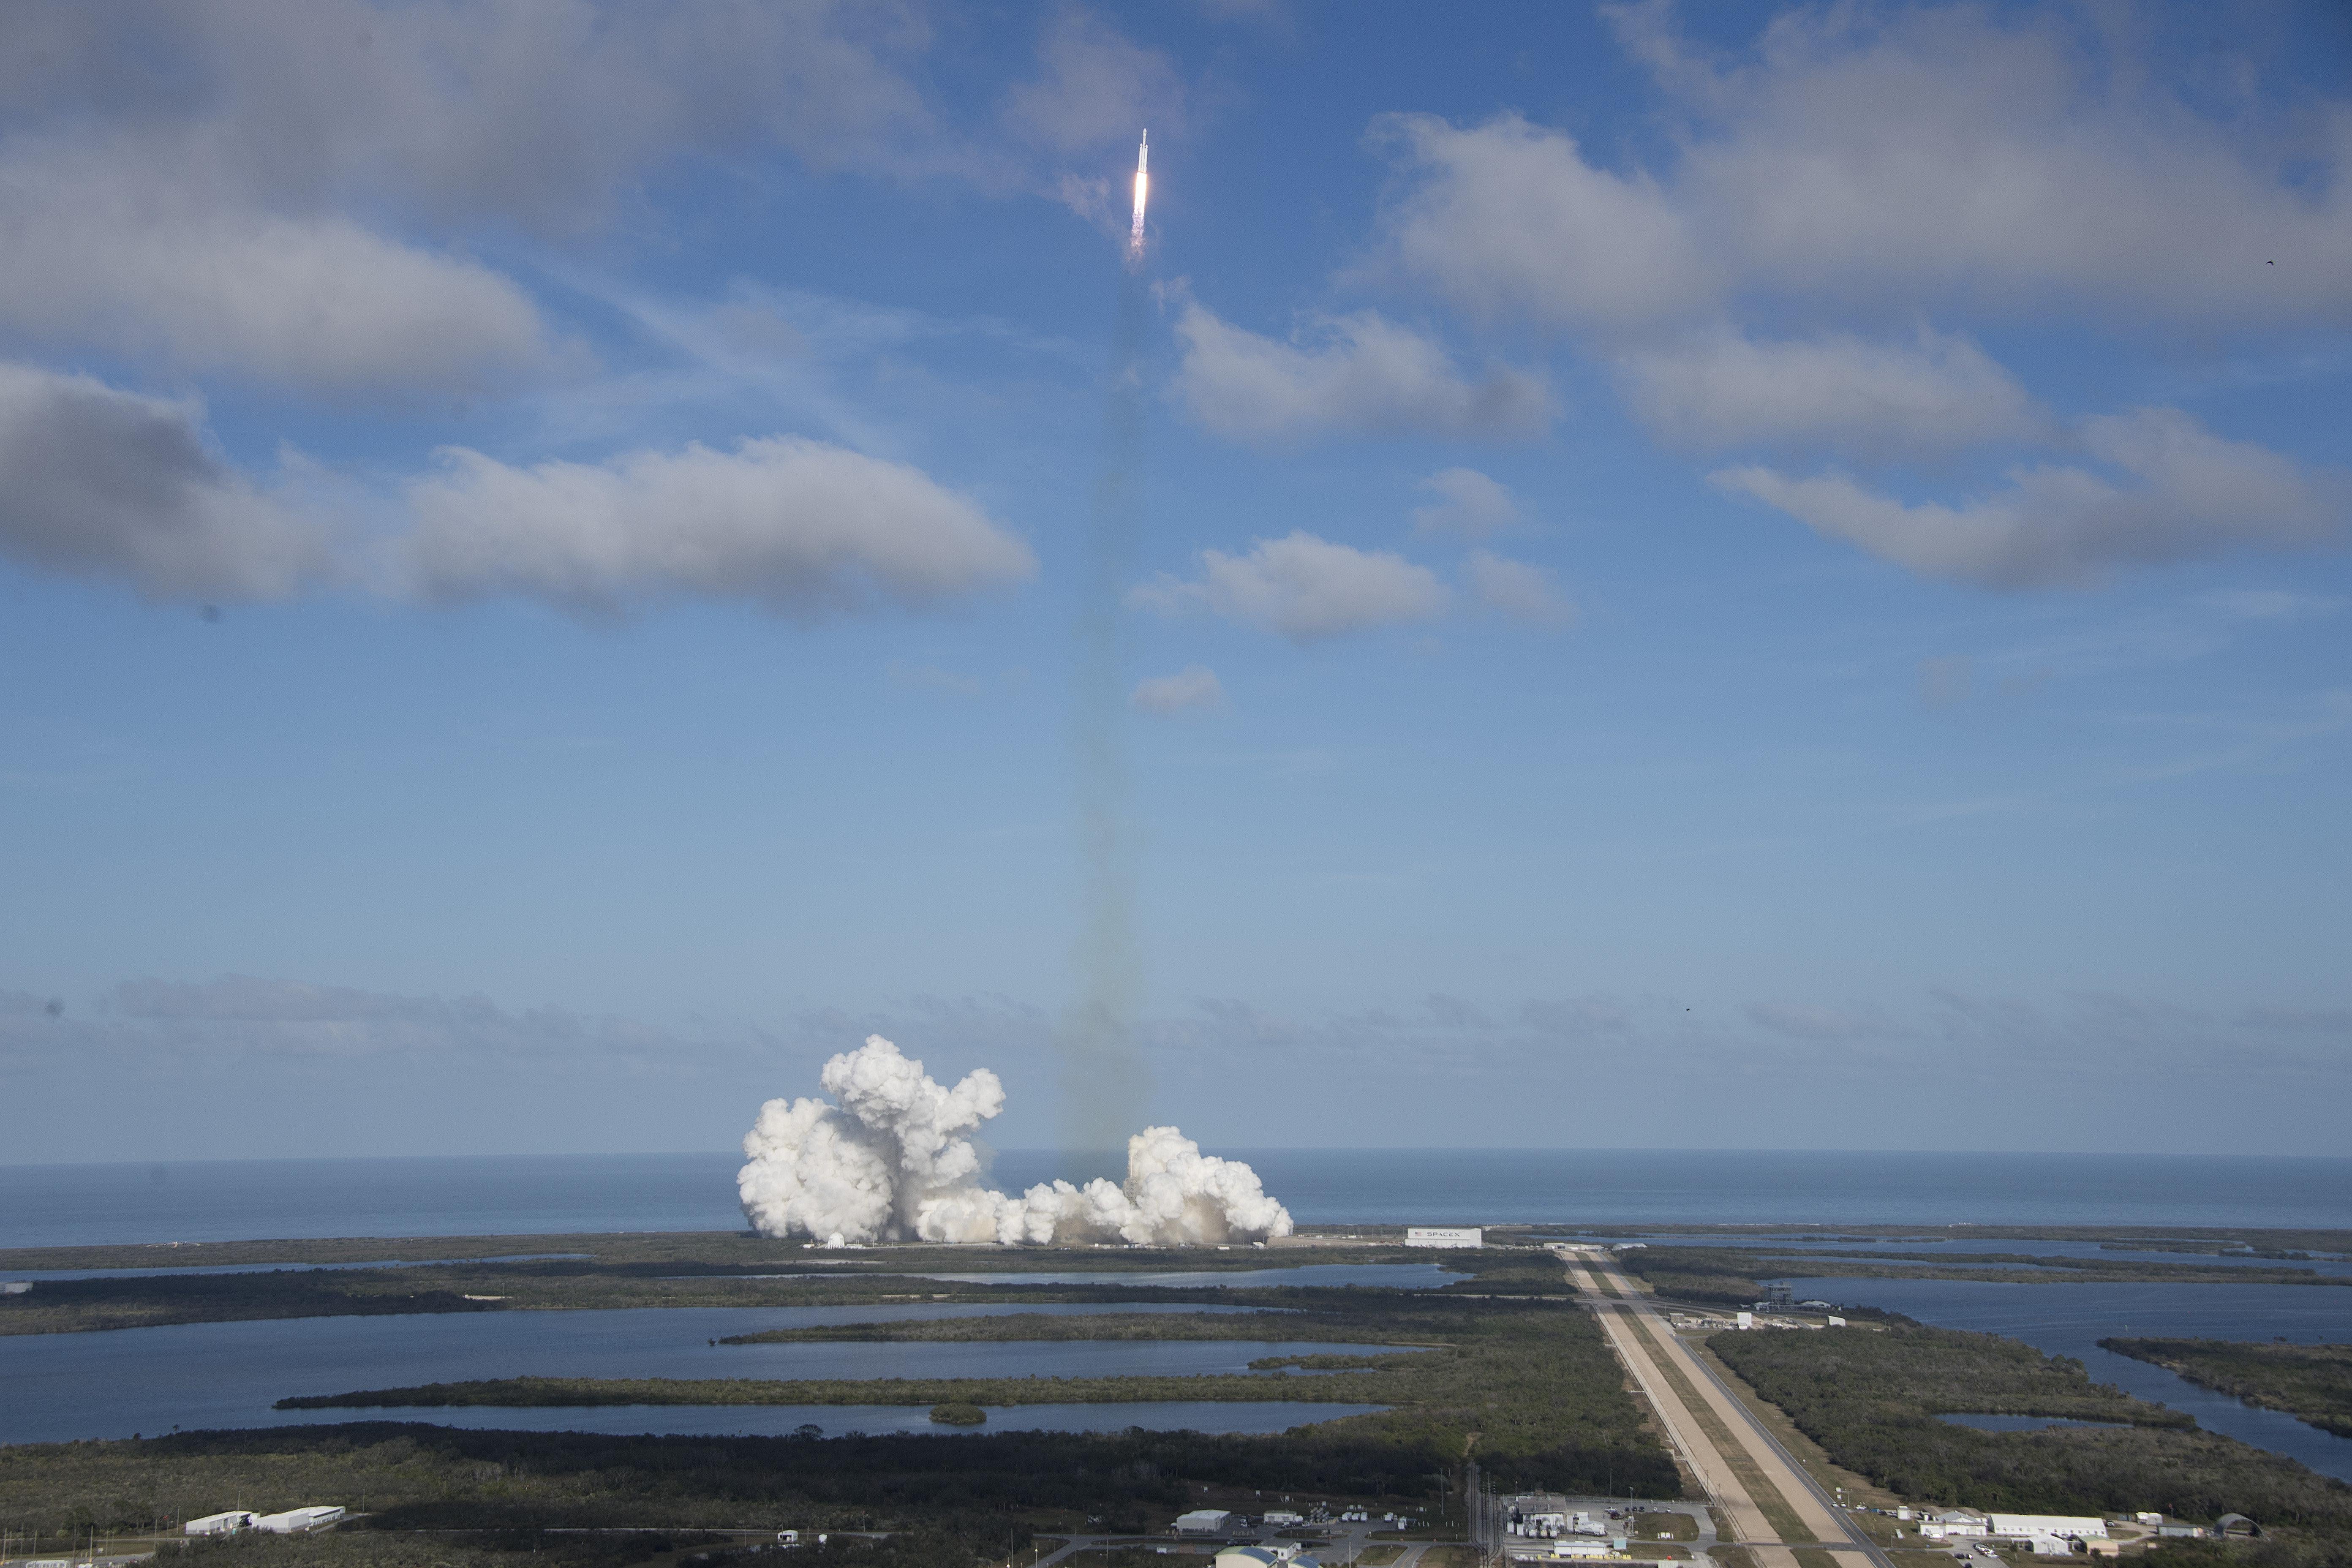 The SpaceX Falcon Heavy launches from Pad 39A at the Kennedy Space Center in Florida, on February 6, 2018, on its demonstration mission.
The world's most powerful rocket, SpaceX's Falcon Heavy, blasted off Tuesday on its highly anticipated maiden test flight, carrying CEO Elon Musk's cherry red Tesla roadster to an orbit near Mars. Screams and cheers erupted at Cape Canaveral, Florida as the massive rocket fired its 27 engines and rumbled into the blue sky over the same NASA launchpad that served as a base for the US missions to Moon four decades ago.
 / AFP PHOTO / JIM WATSON        (Photo credit should read JIM WATSON/AFP/Getty Images)